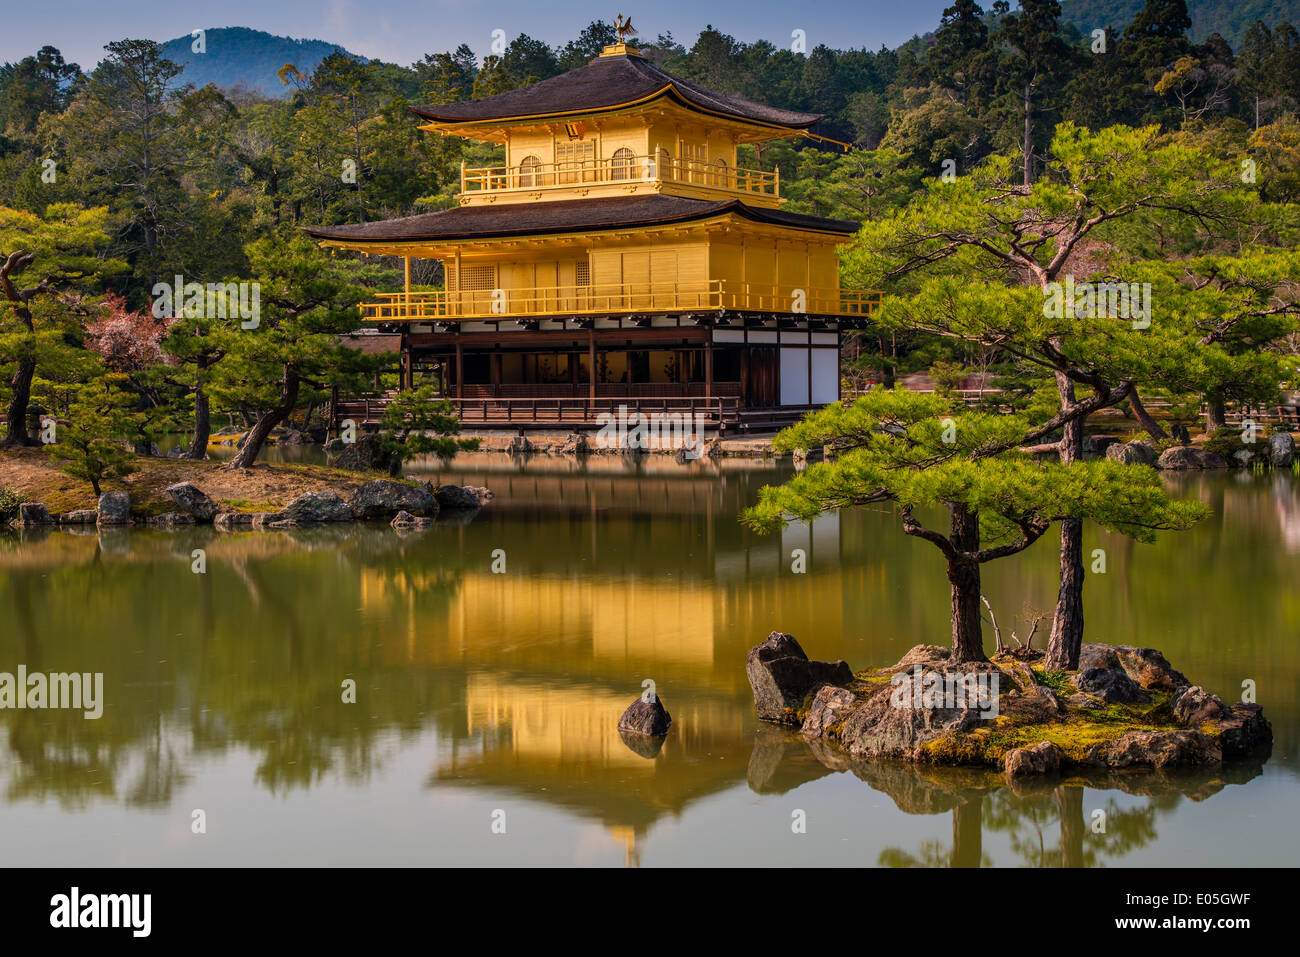 Kinkaku-ji or Temple of the Golden Pavilion reflected in the pond, Kyoto, Japan Stock Photo